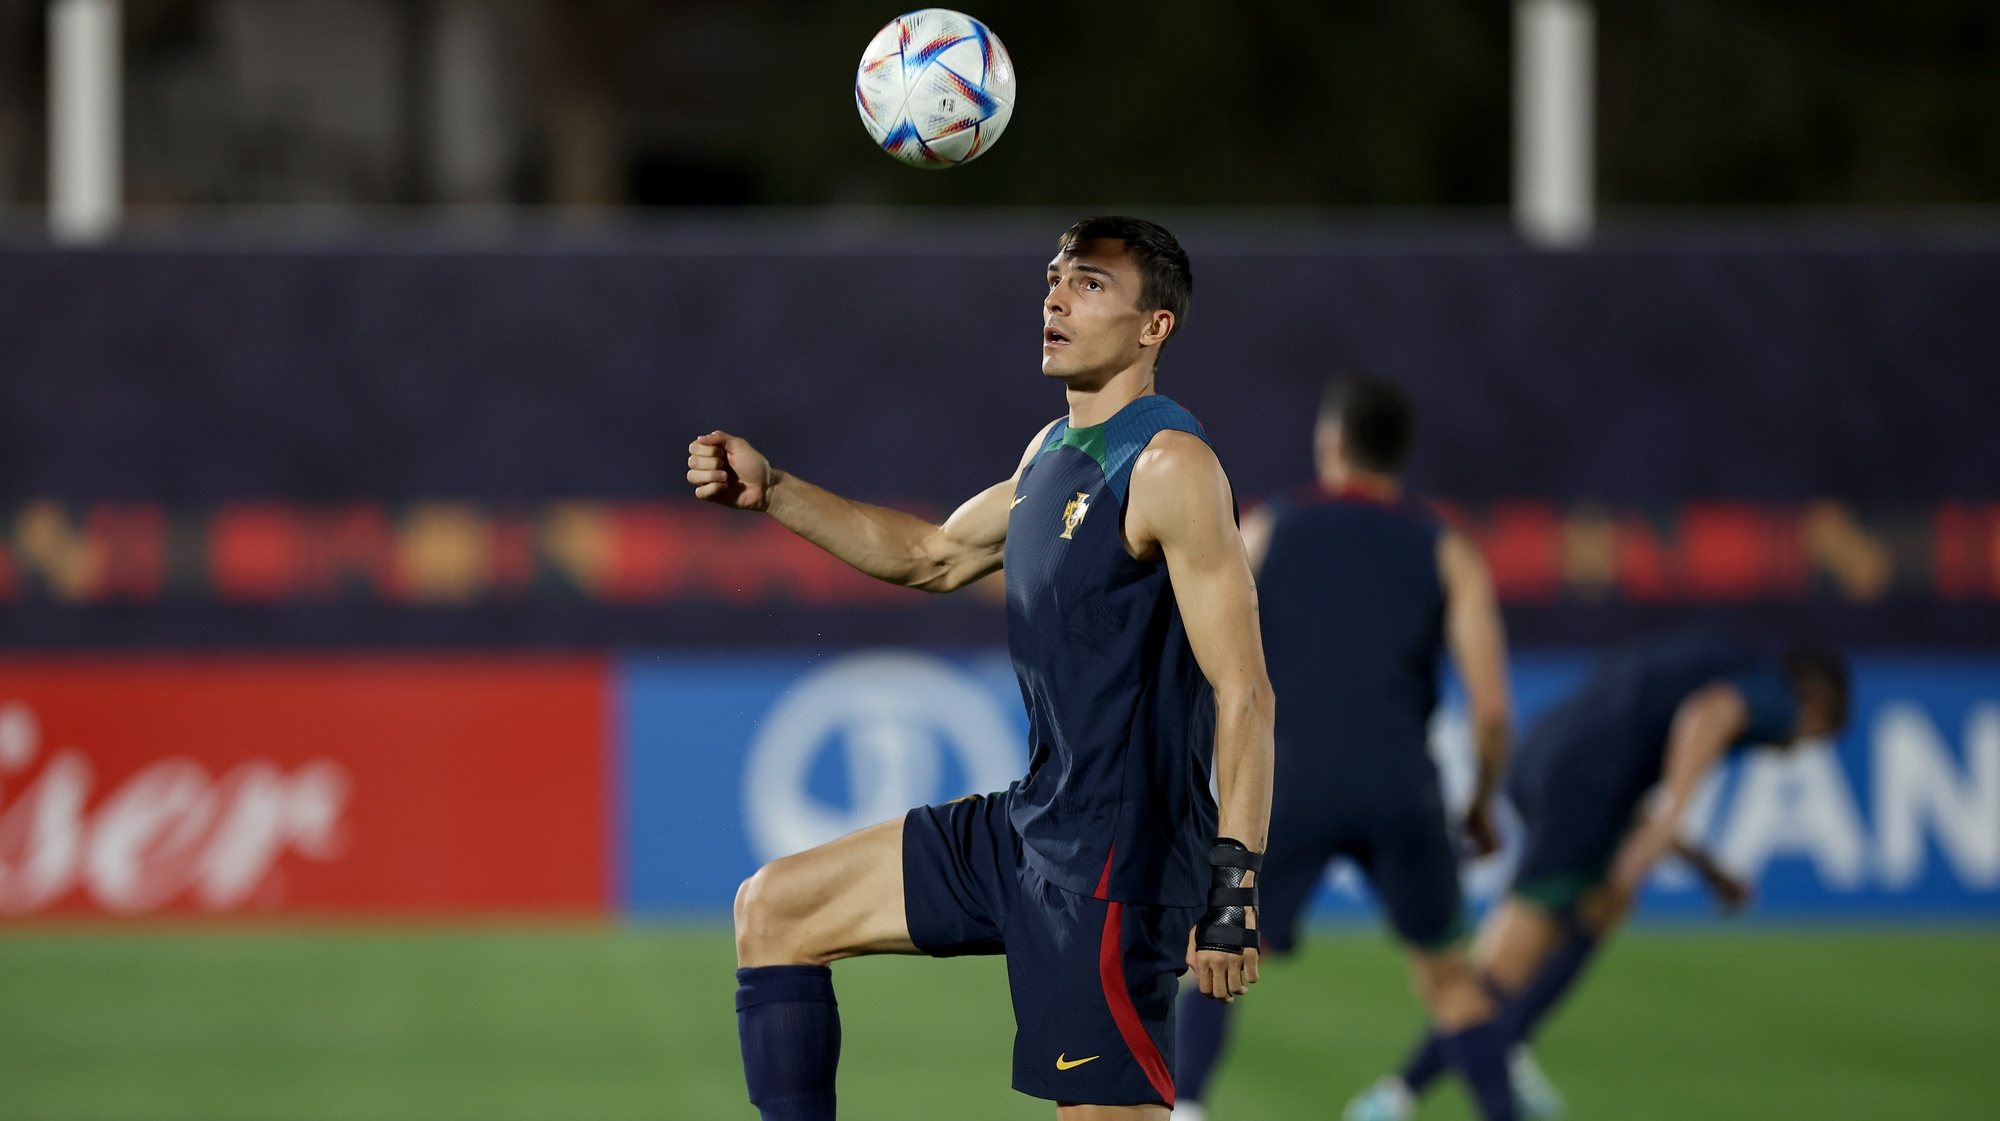 Portugal National team player Joao Palhinha during a training session in Al-Shahaniya, Qatar, 01 December 2022. The FIFA World Cup 2022 takes place in Qatar from 20 November until 18 December 2022. JOSE SENA GOULAO/LUSA